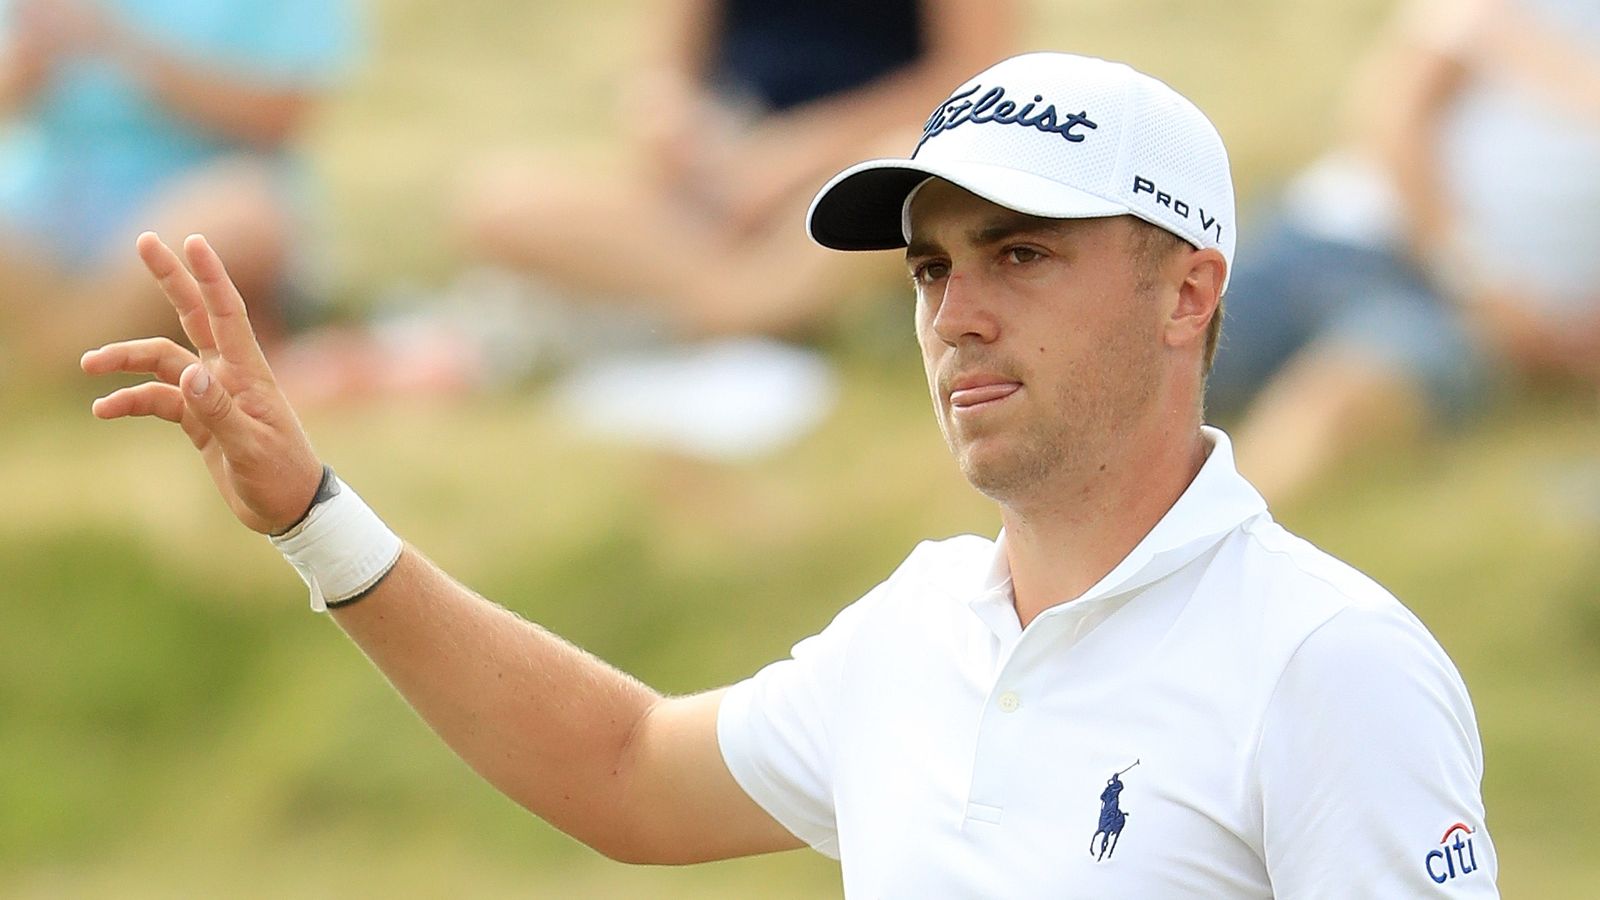 Justin Thomas fires a US Openrecord 63 on day three at Erin Hills